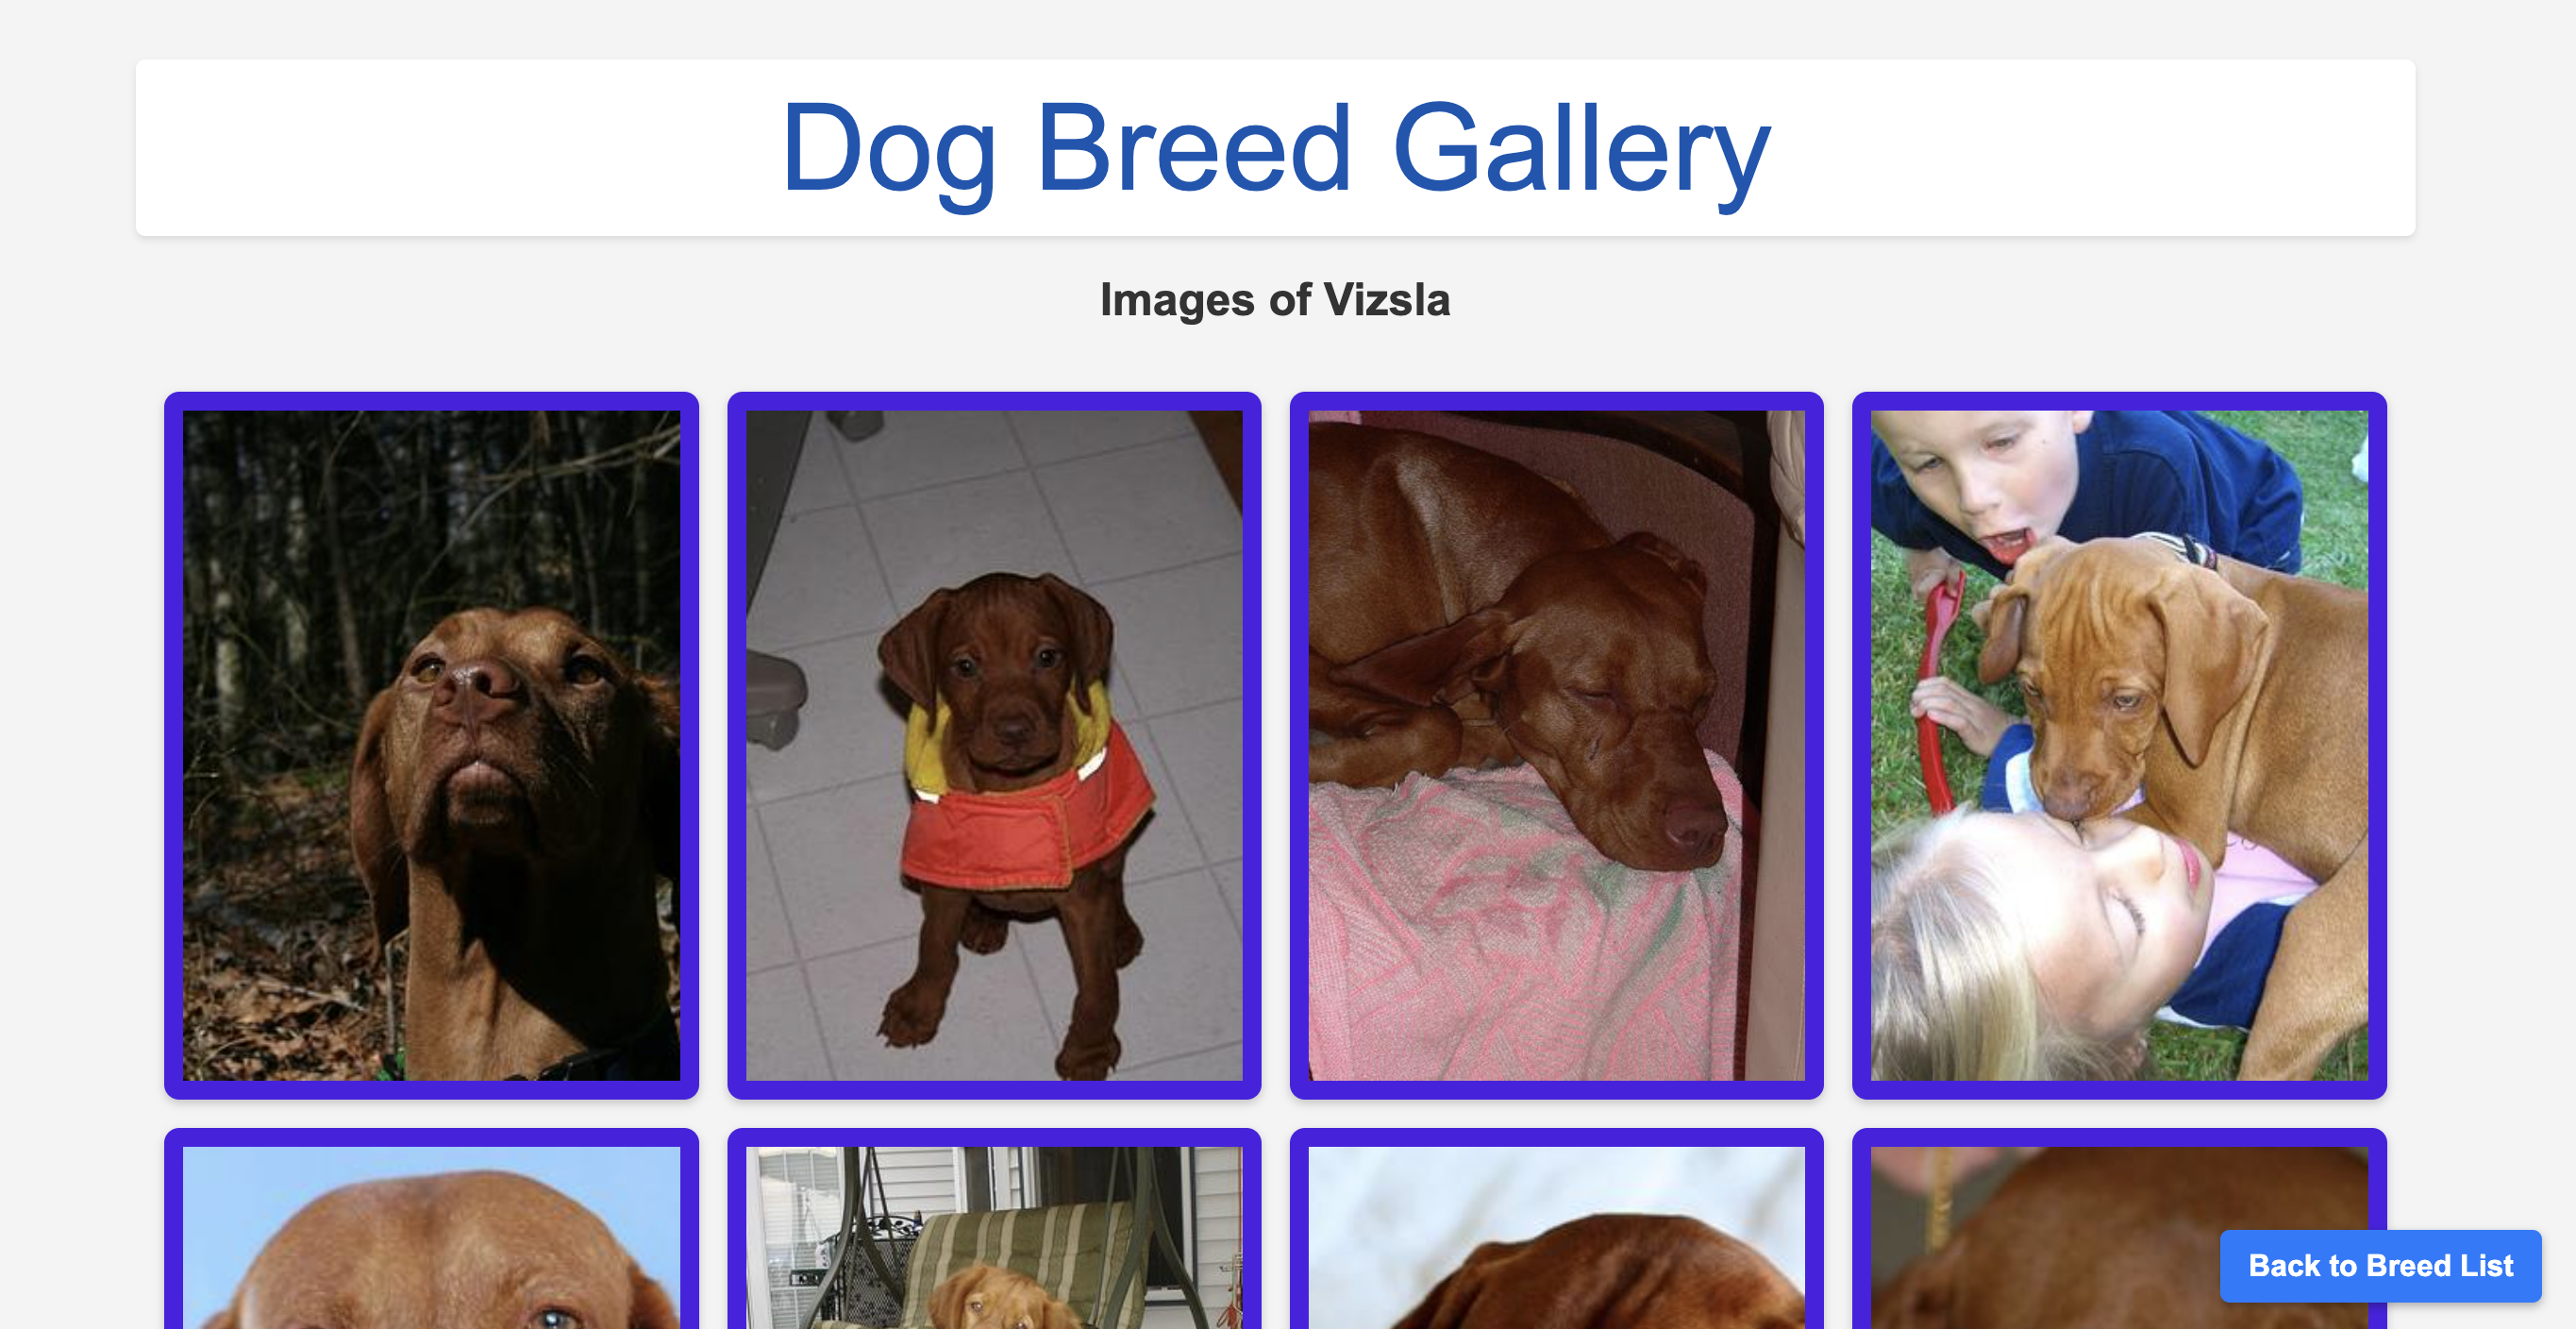 Screen capture of the dog breed images page created in the tutorial